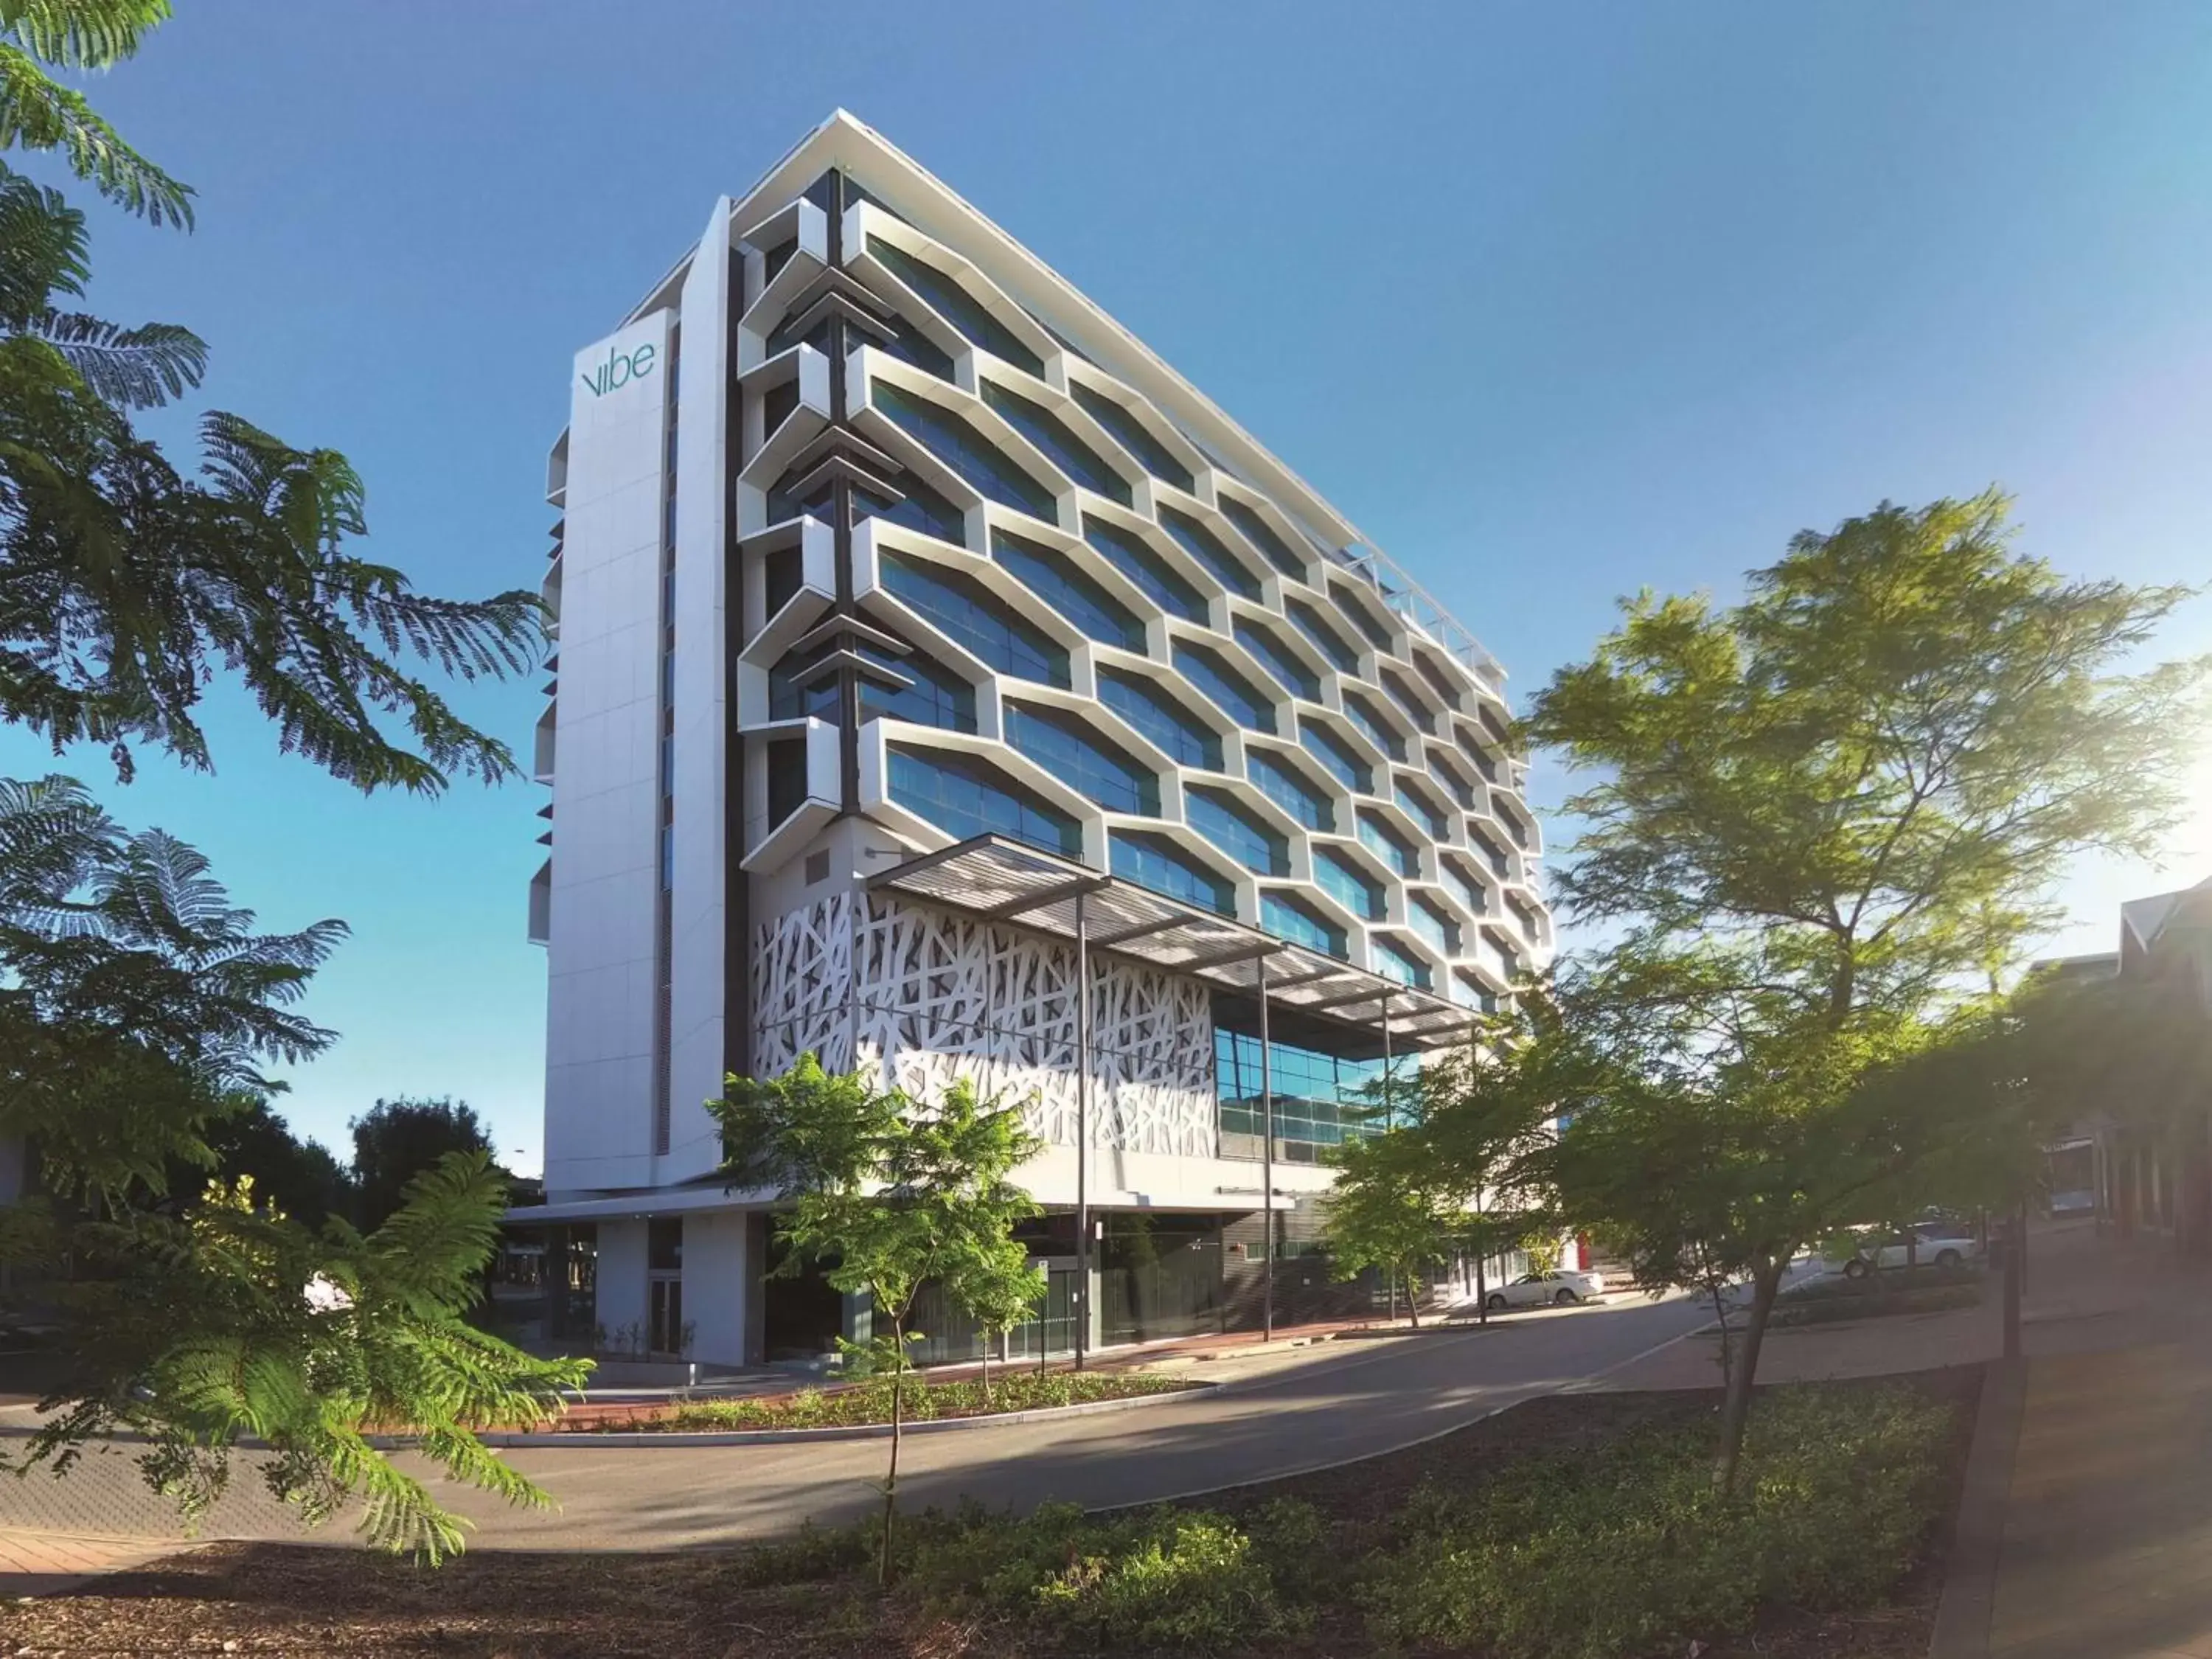 Property Building in Vibe Hotel Subiaco Perth